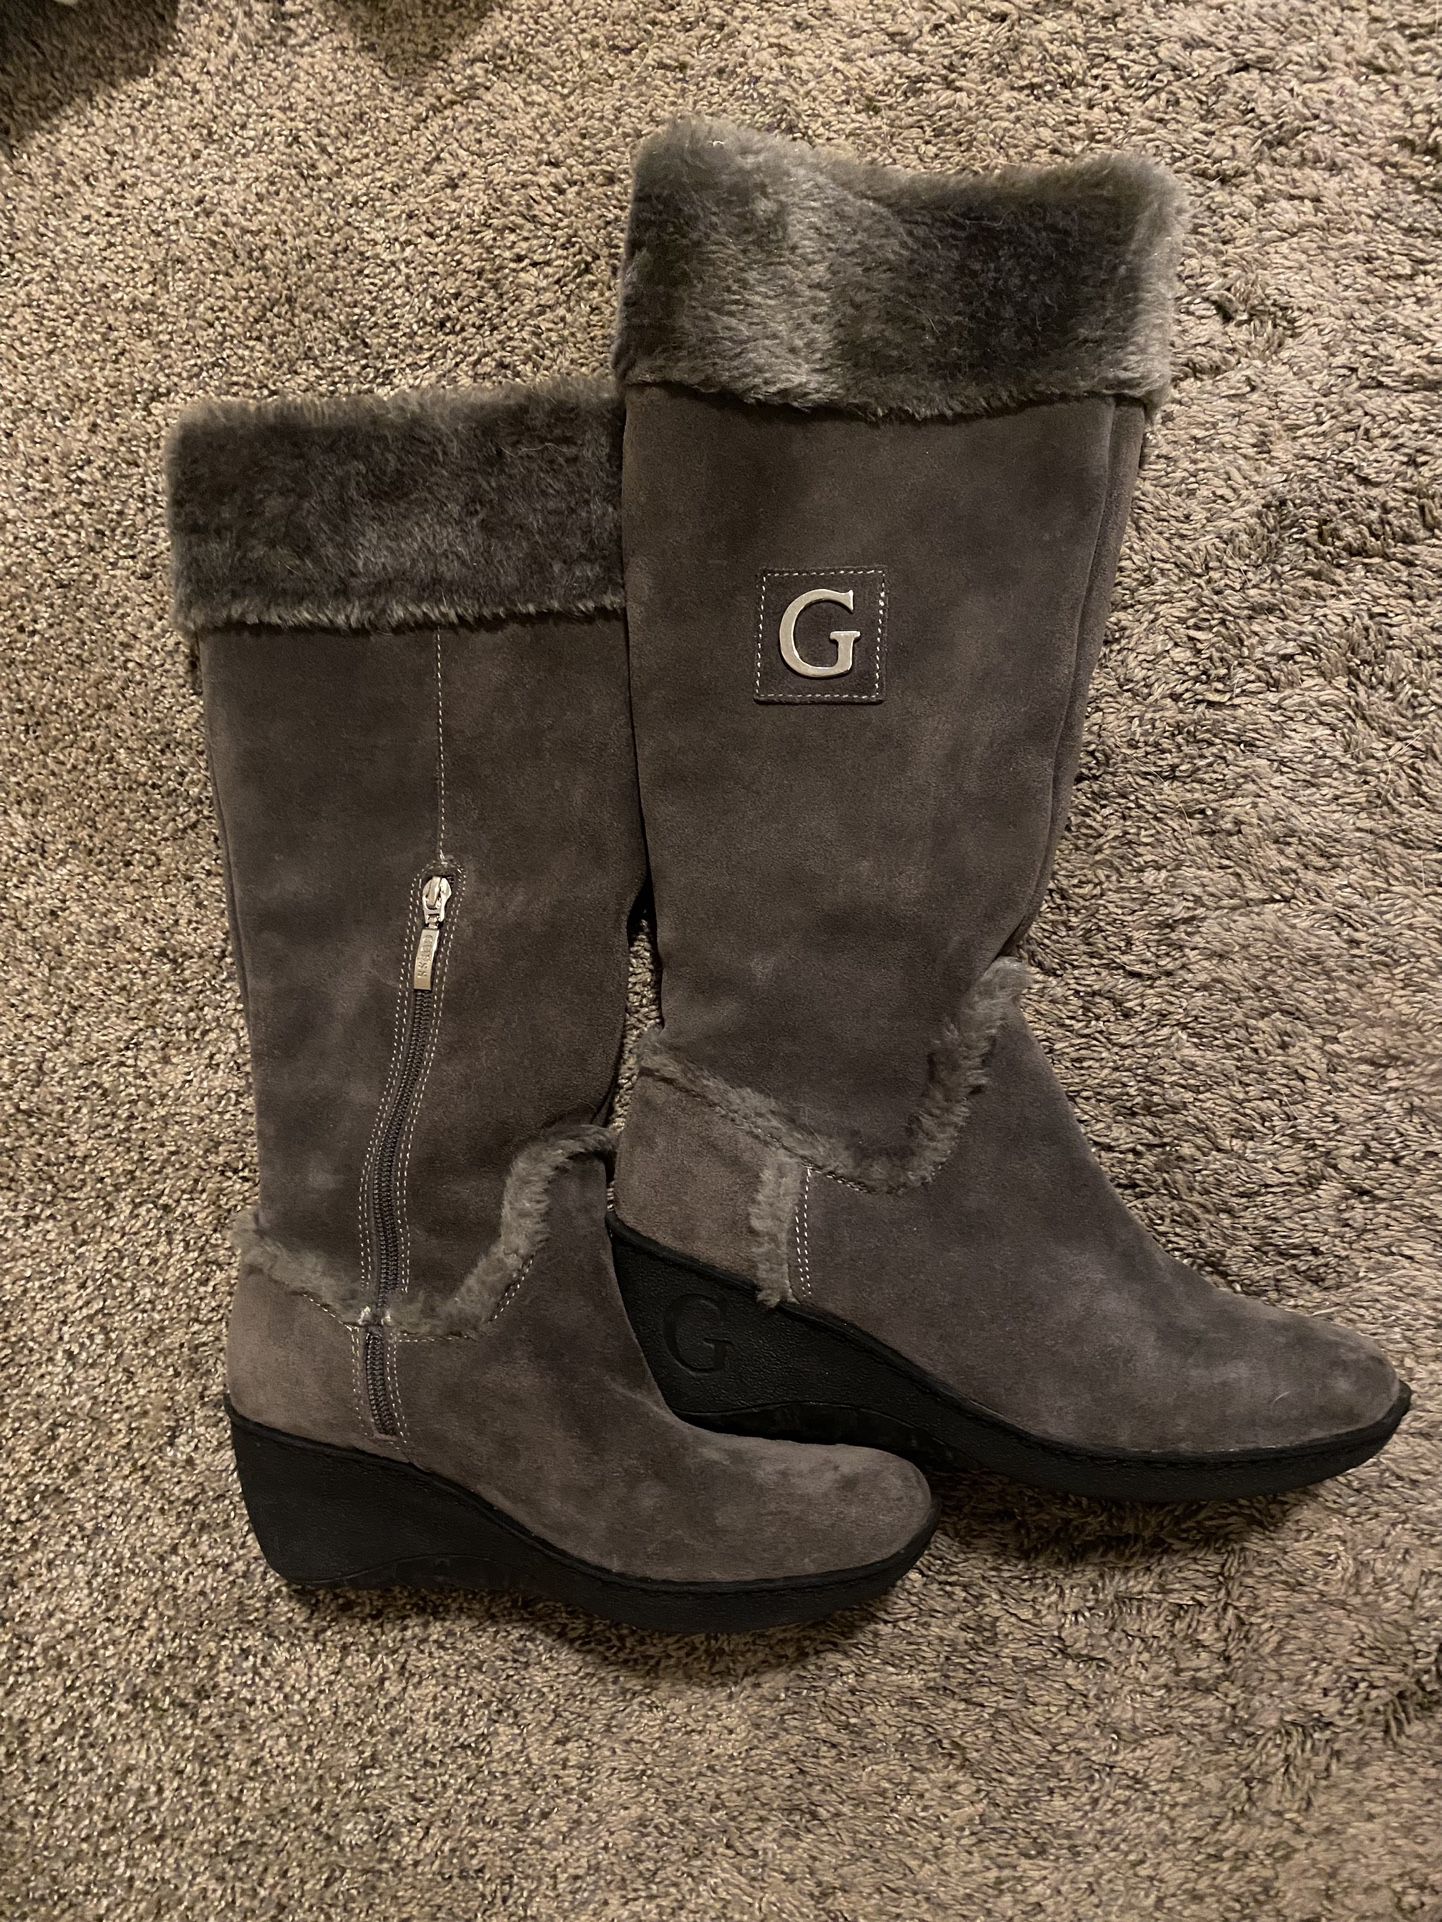 G by Guess Gray Suede Wedge Faux Fur Winter Boots, Size 9